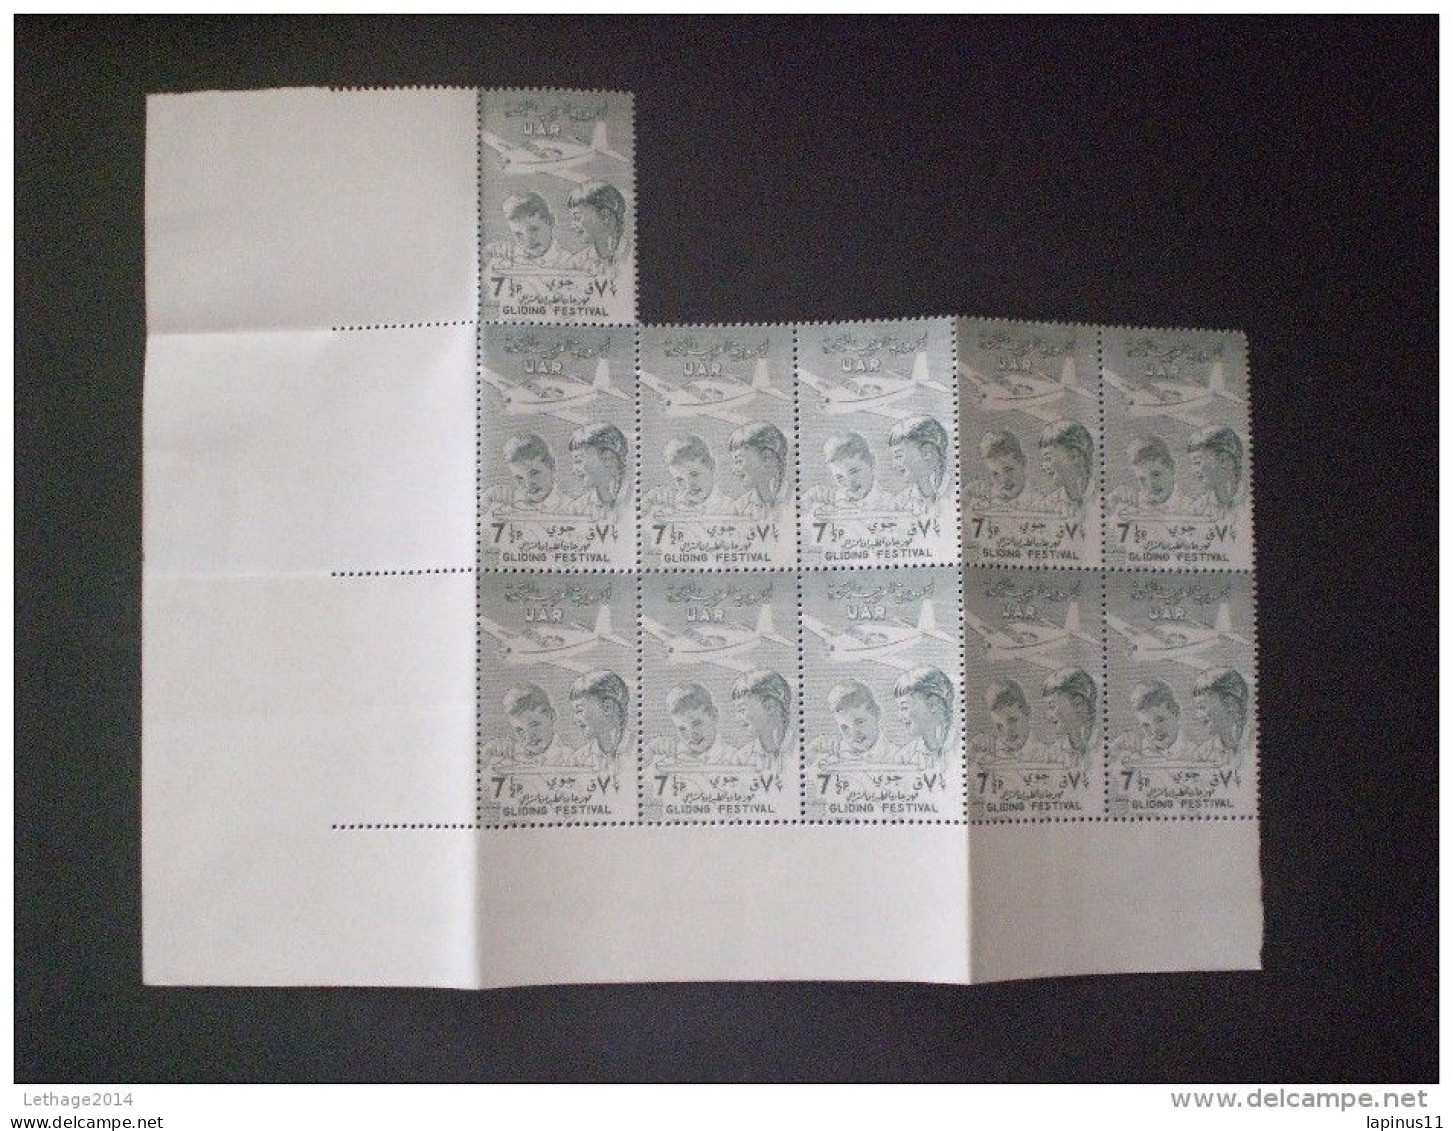 STAMPS SYRIE سوريا SYRIA 1958 Glider Festival +6 PHOTO - Syria